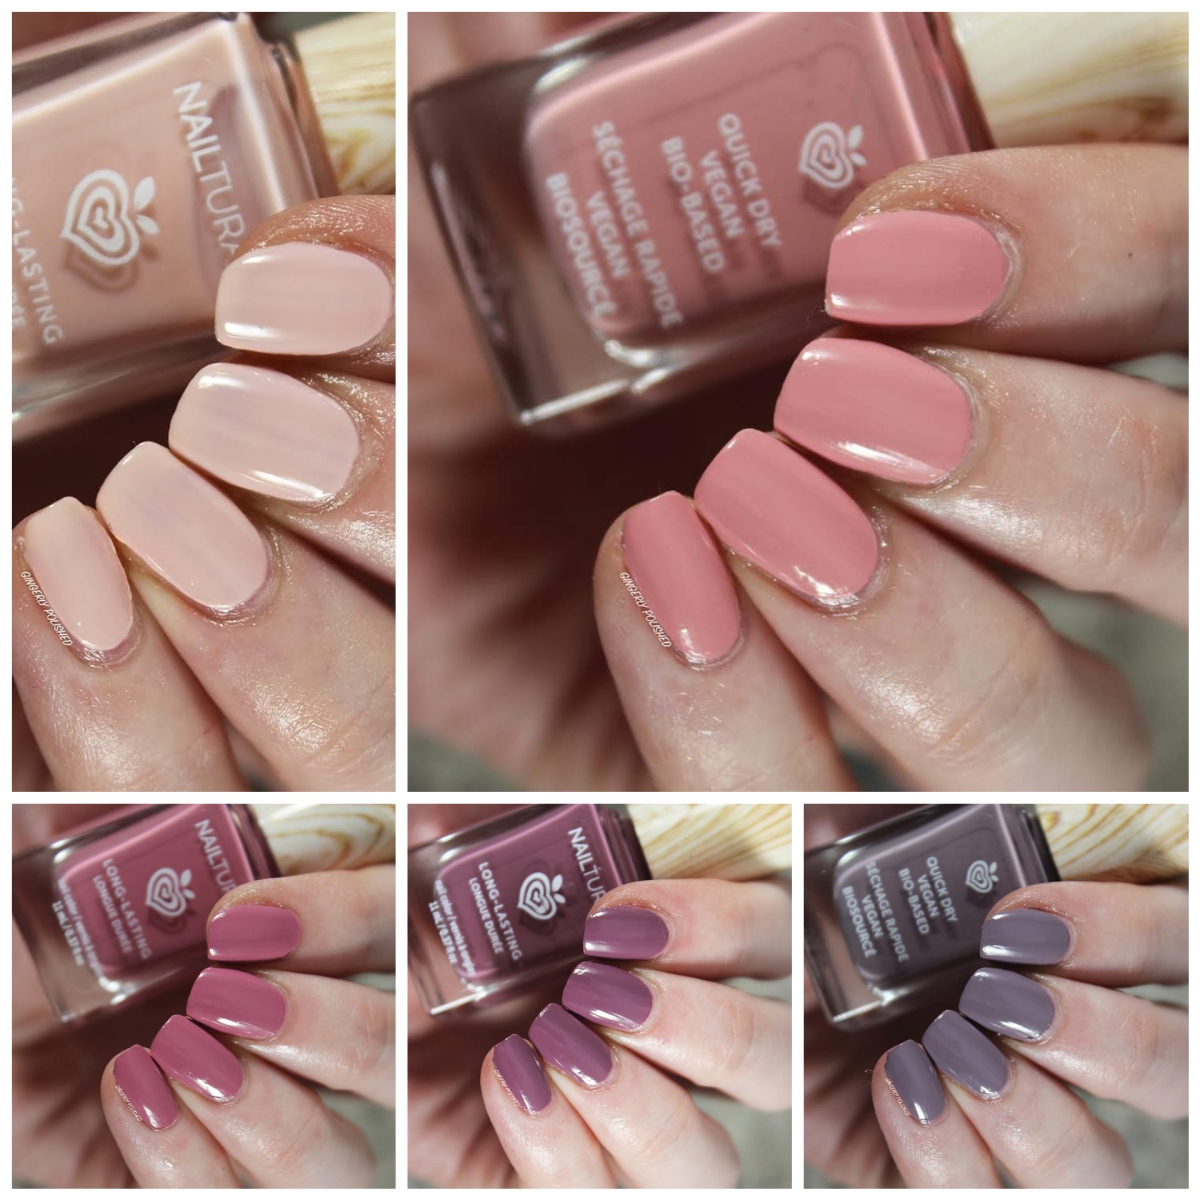 Nailtural & – Review GINGERLY Swatches – POLISHED Malibu Collection